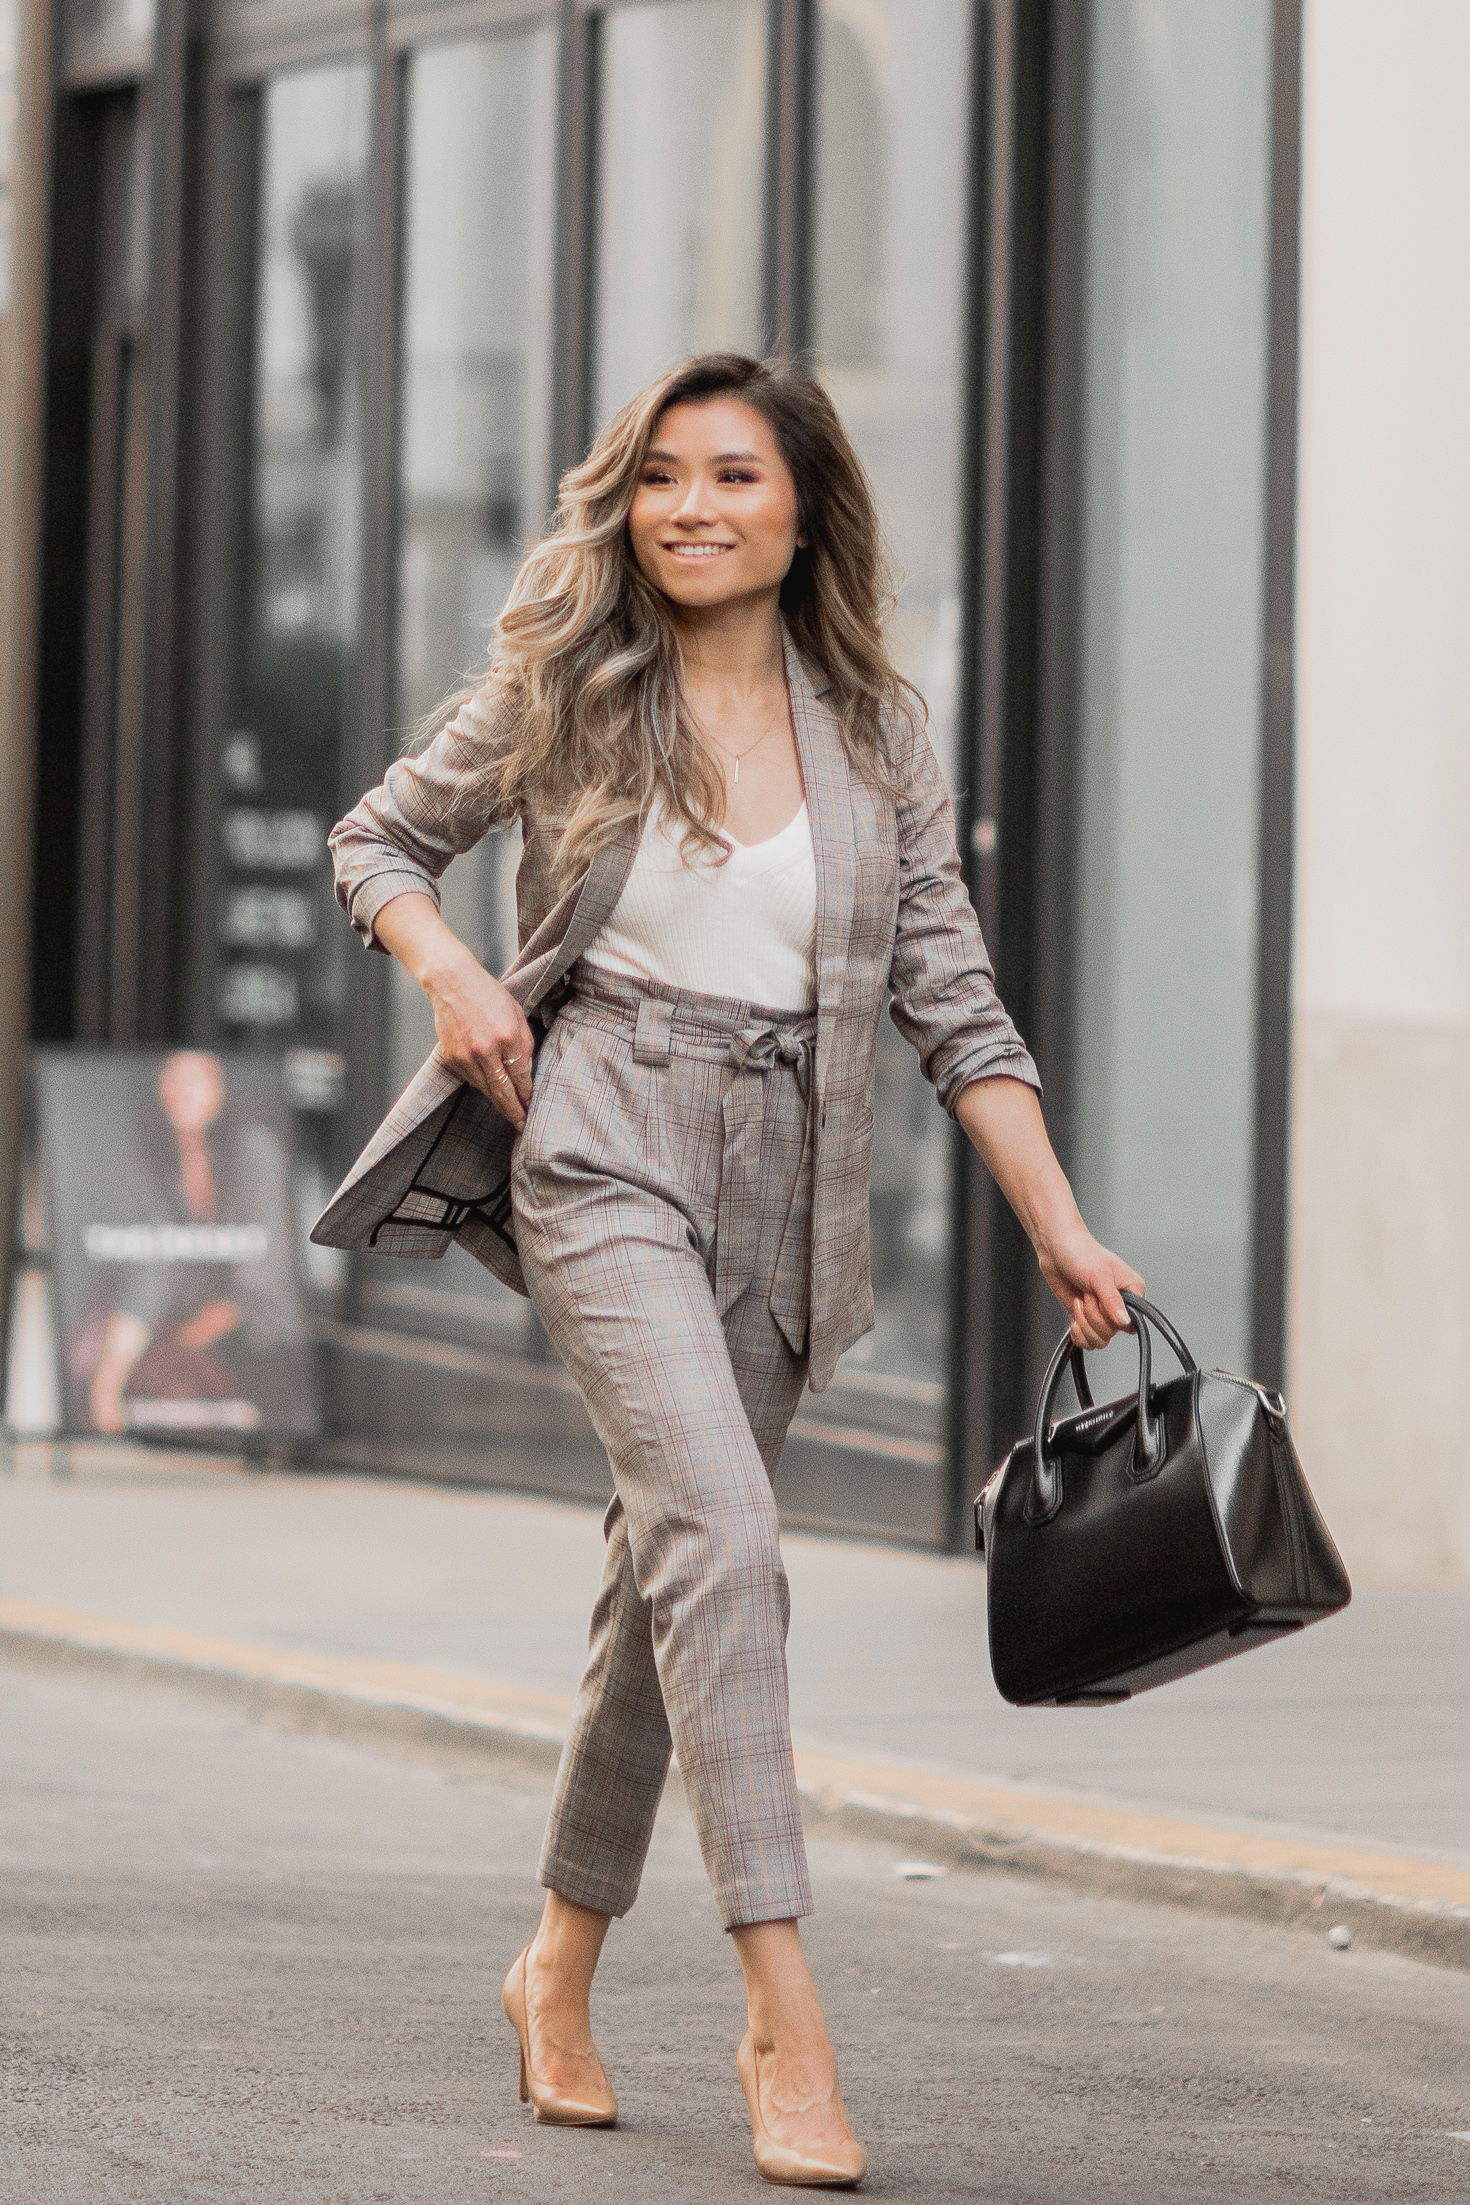 https://misslouie.com/wp-content/uploads/2018/10/Work-outfits-for-women-fall-express-work-clothing-plaid-suit-givenchy-small-antigona-bag-blogger-miss-louie-featured.jpg